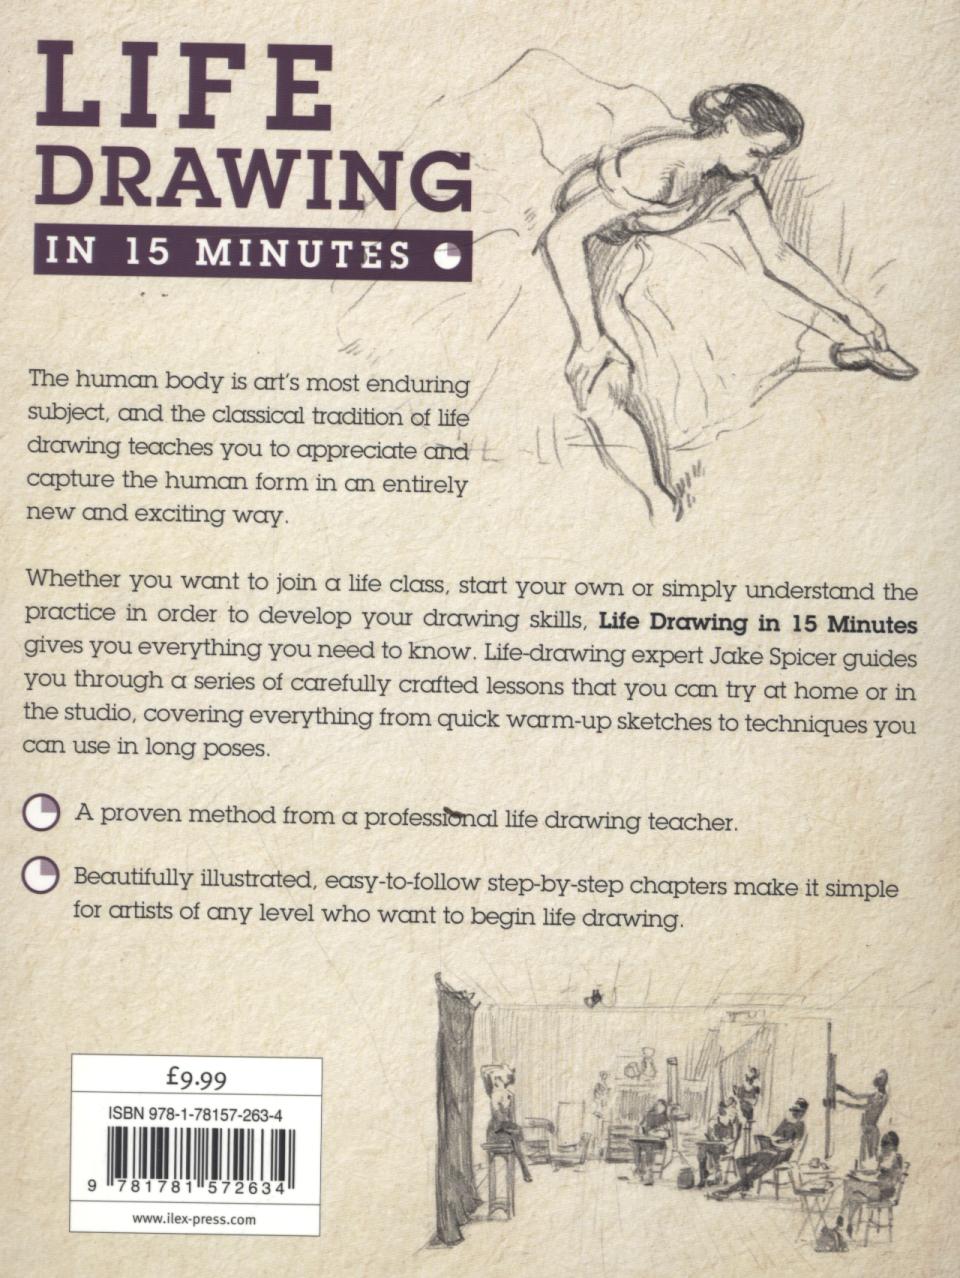 Life Drawing in 15 Minutes